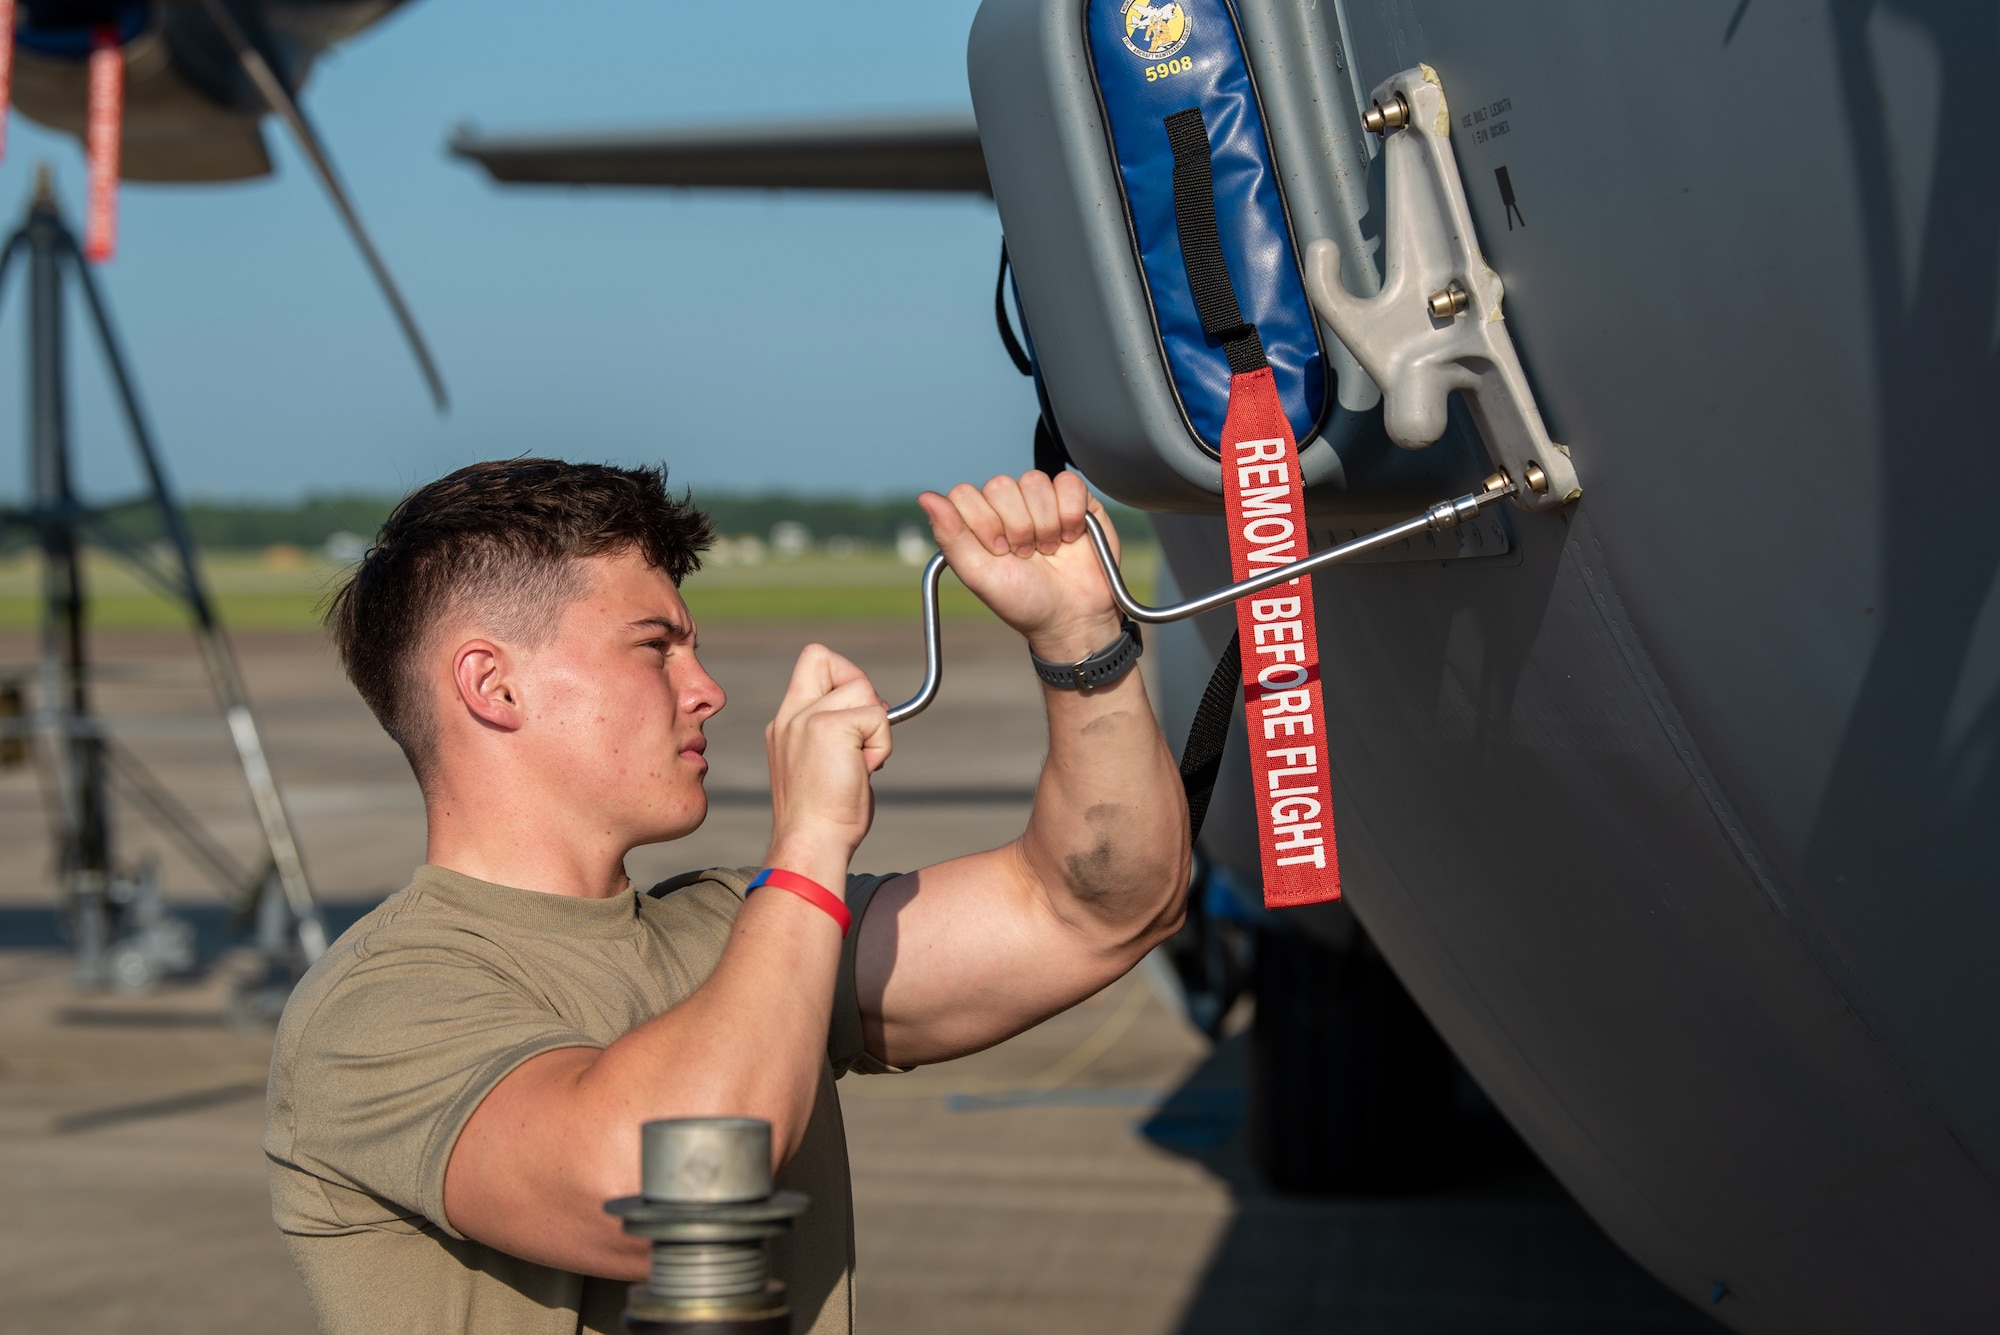 Airman 1st Class Nik Schultz, a crew chief with the Kentucky Air National Guard’s 123rd Aircraft Maintenance Squadron, installs a jack pad on a C-130J Super Hercules at the Gulfport Combat Readiness Training Center in Gulfport, Miss., Aug. 15, 2022, as part of Maintenance University. More than 300 Air Guardsmen from Kentucky, Texas, West Virginia, Rhode Island and California trained on career-specific proficiencies during the intensive week-long course. (U.S Air National Guard photo by Phil Speck)